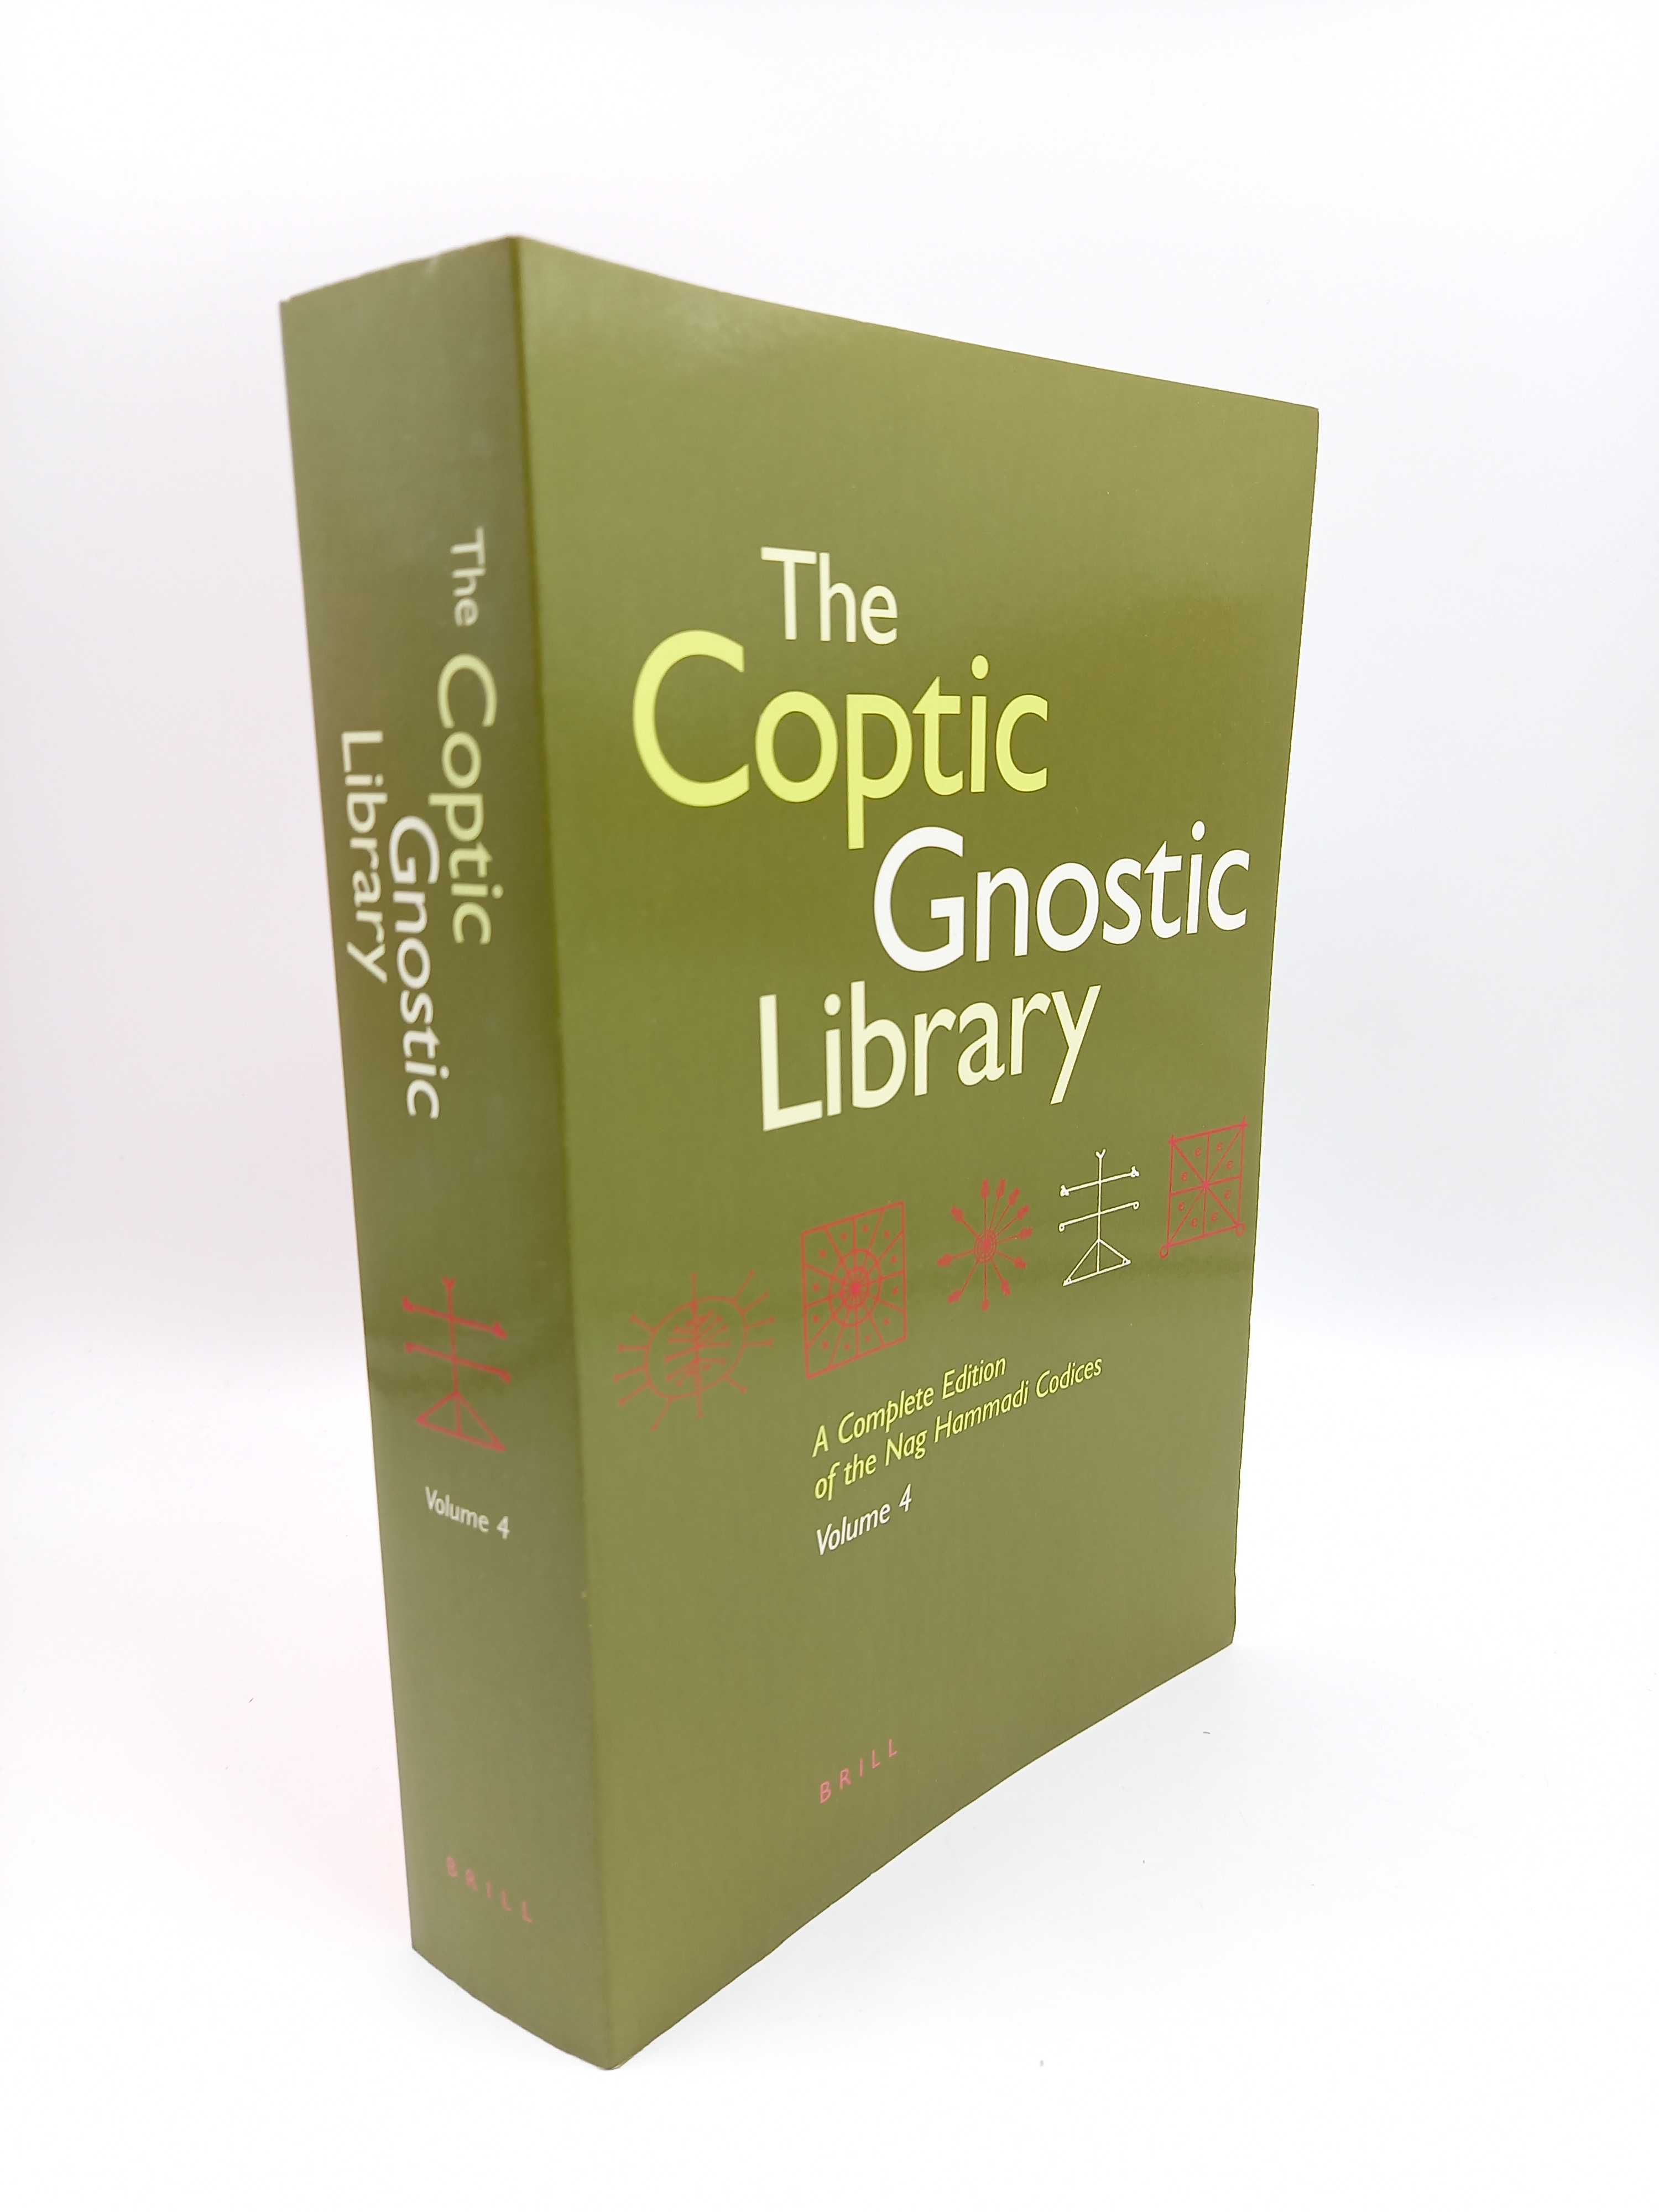 The Coptic Gnostic Library. A Complete Edition of the Nag Hammadi Codices; Volume IV. The Paraphrase of Shem, The Second Treatise of the Great Seth, Apocalypse of Peter, The Teachings of Silvanus; The Three Steles of Seth, Zostrianos, The Letter of Peter to Philip - Robinson, James M. (Ed.)